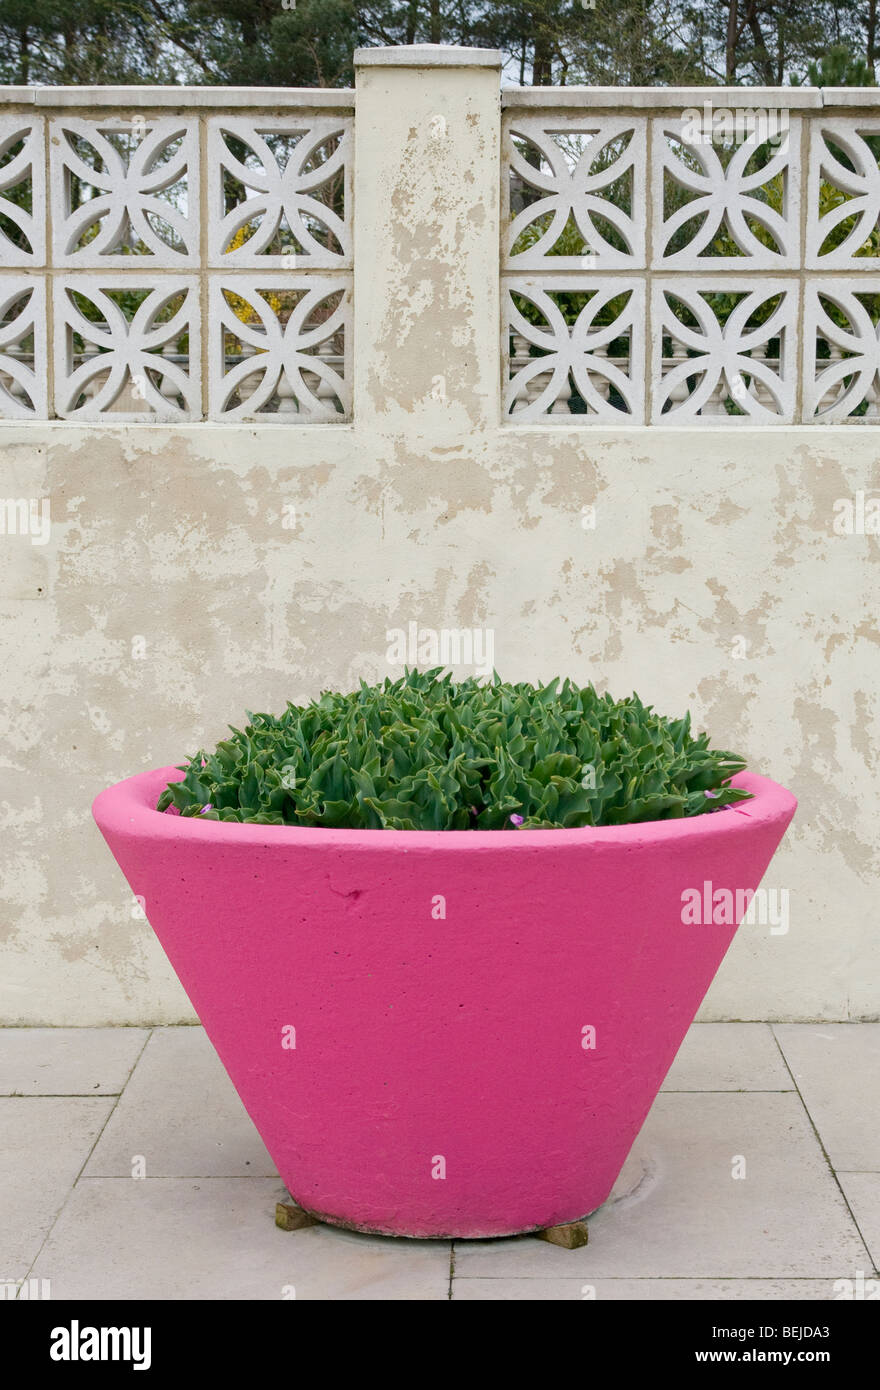 tulips in pink planter concrete wall decorative block RHS [Harlow Carr] Gardens Harrogate Stock Photo